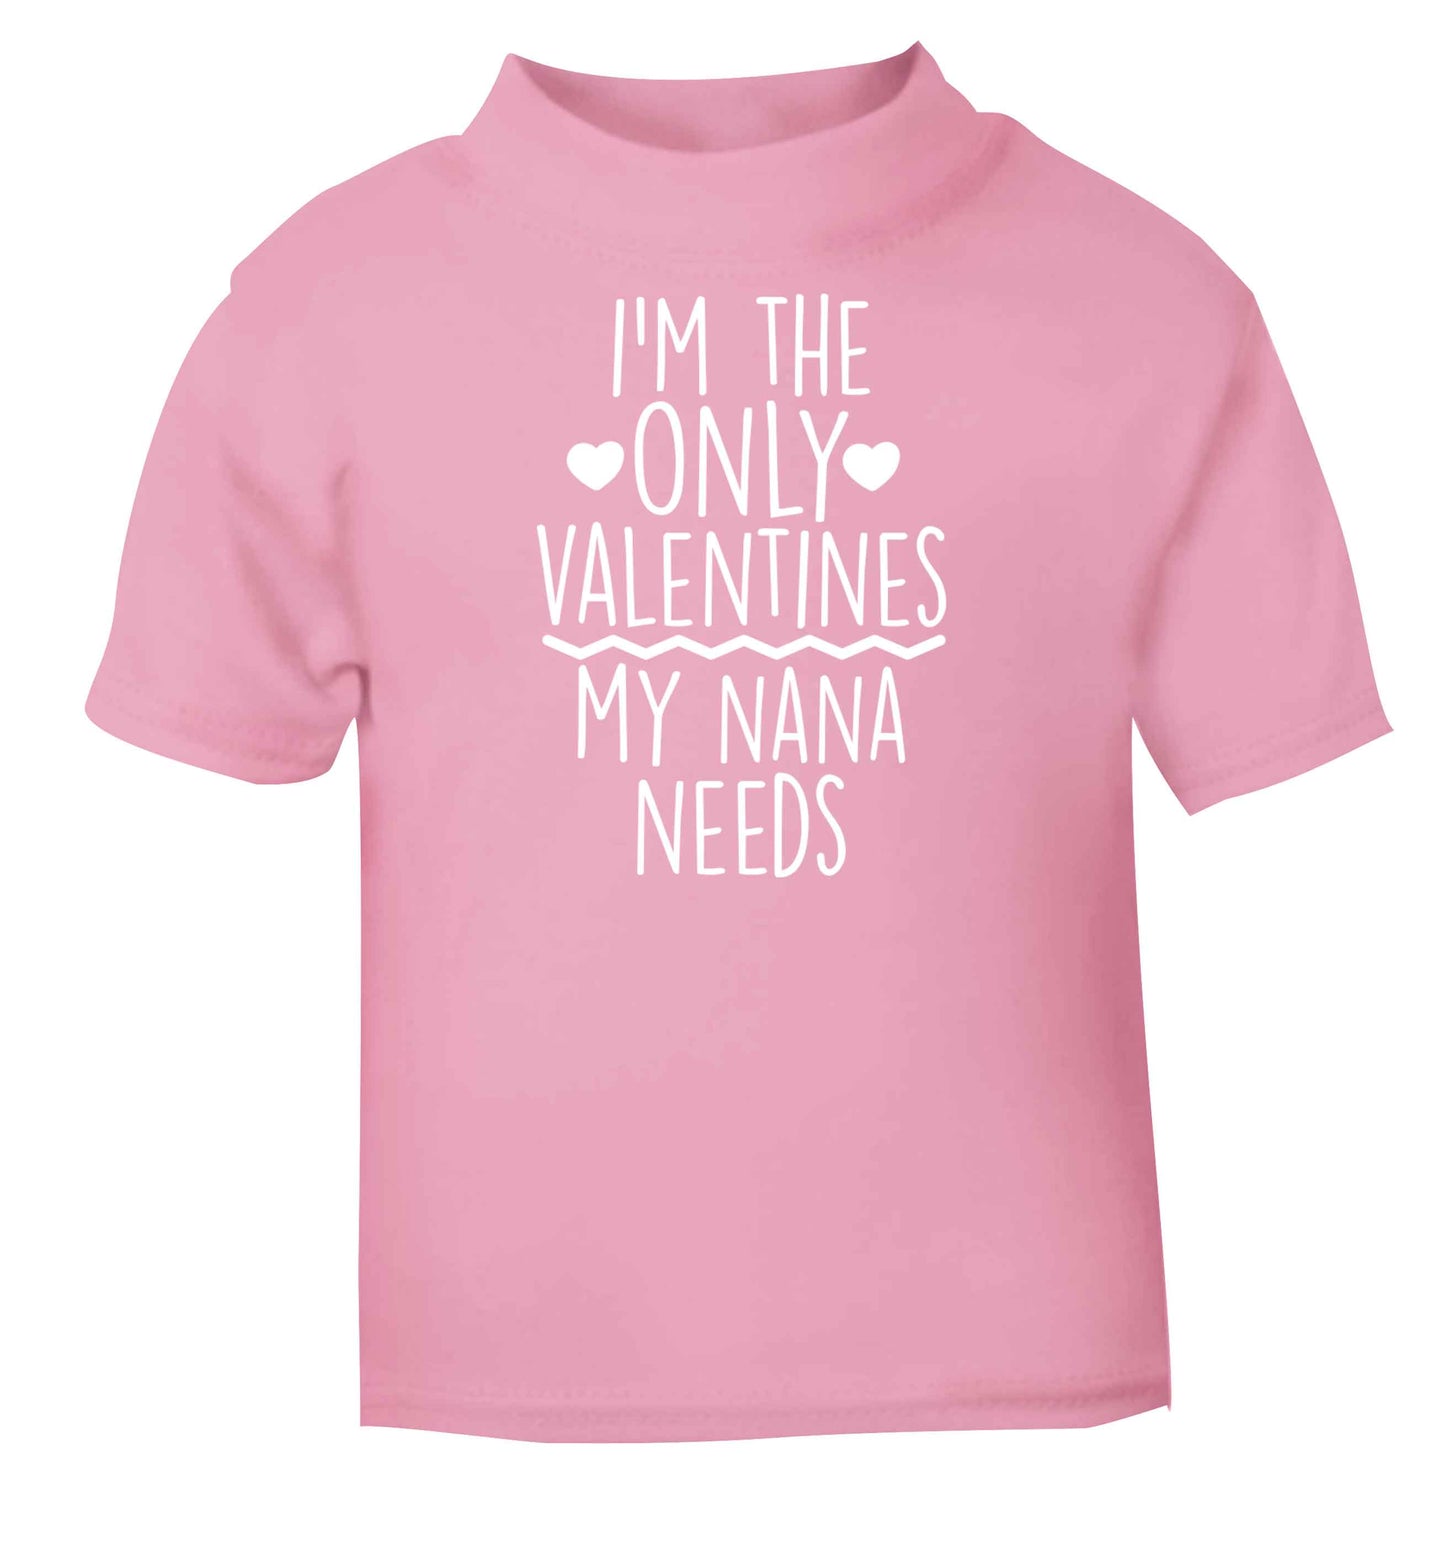 I'm the only valentines my nana needs light pink baby toddler Tshirt 2 Years